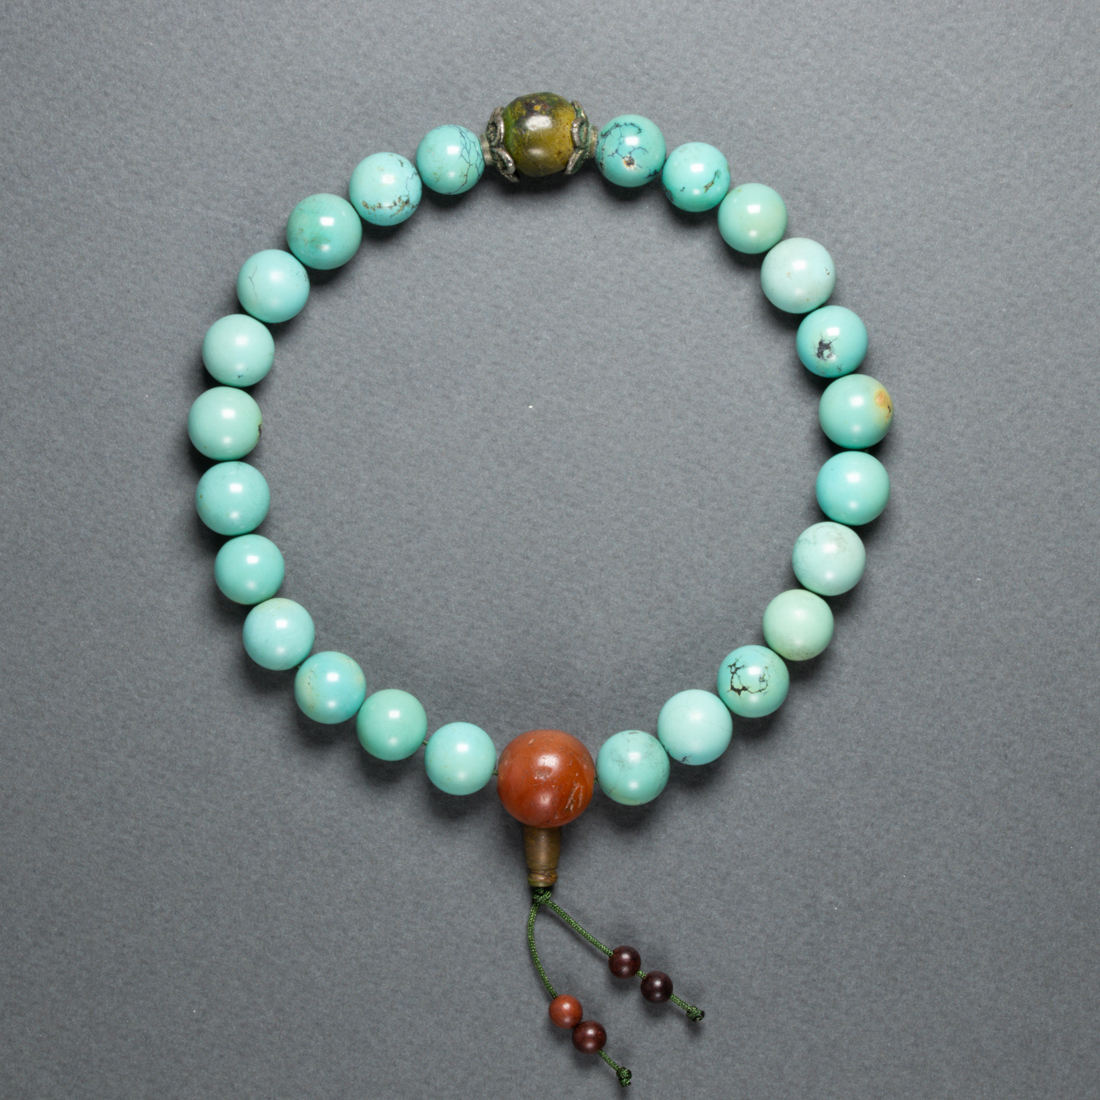 CHINESE TURQUOISE PRAYER BEADS 3a2c16